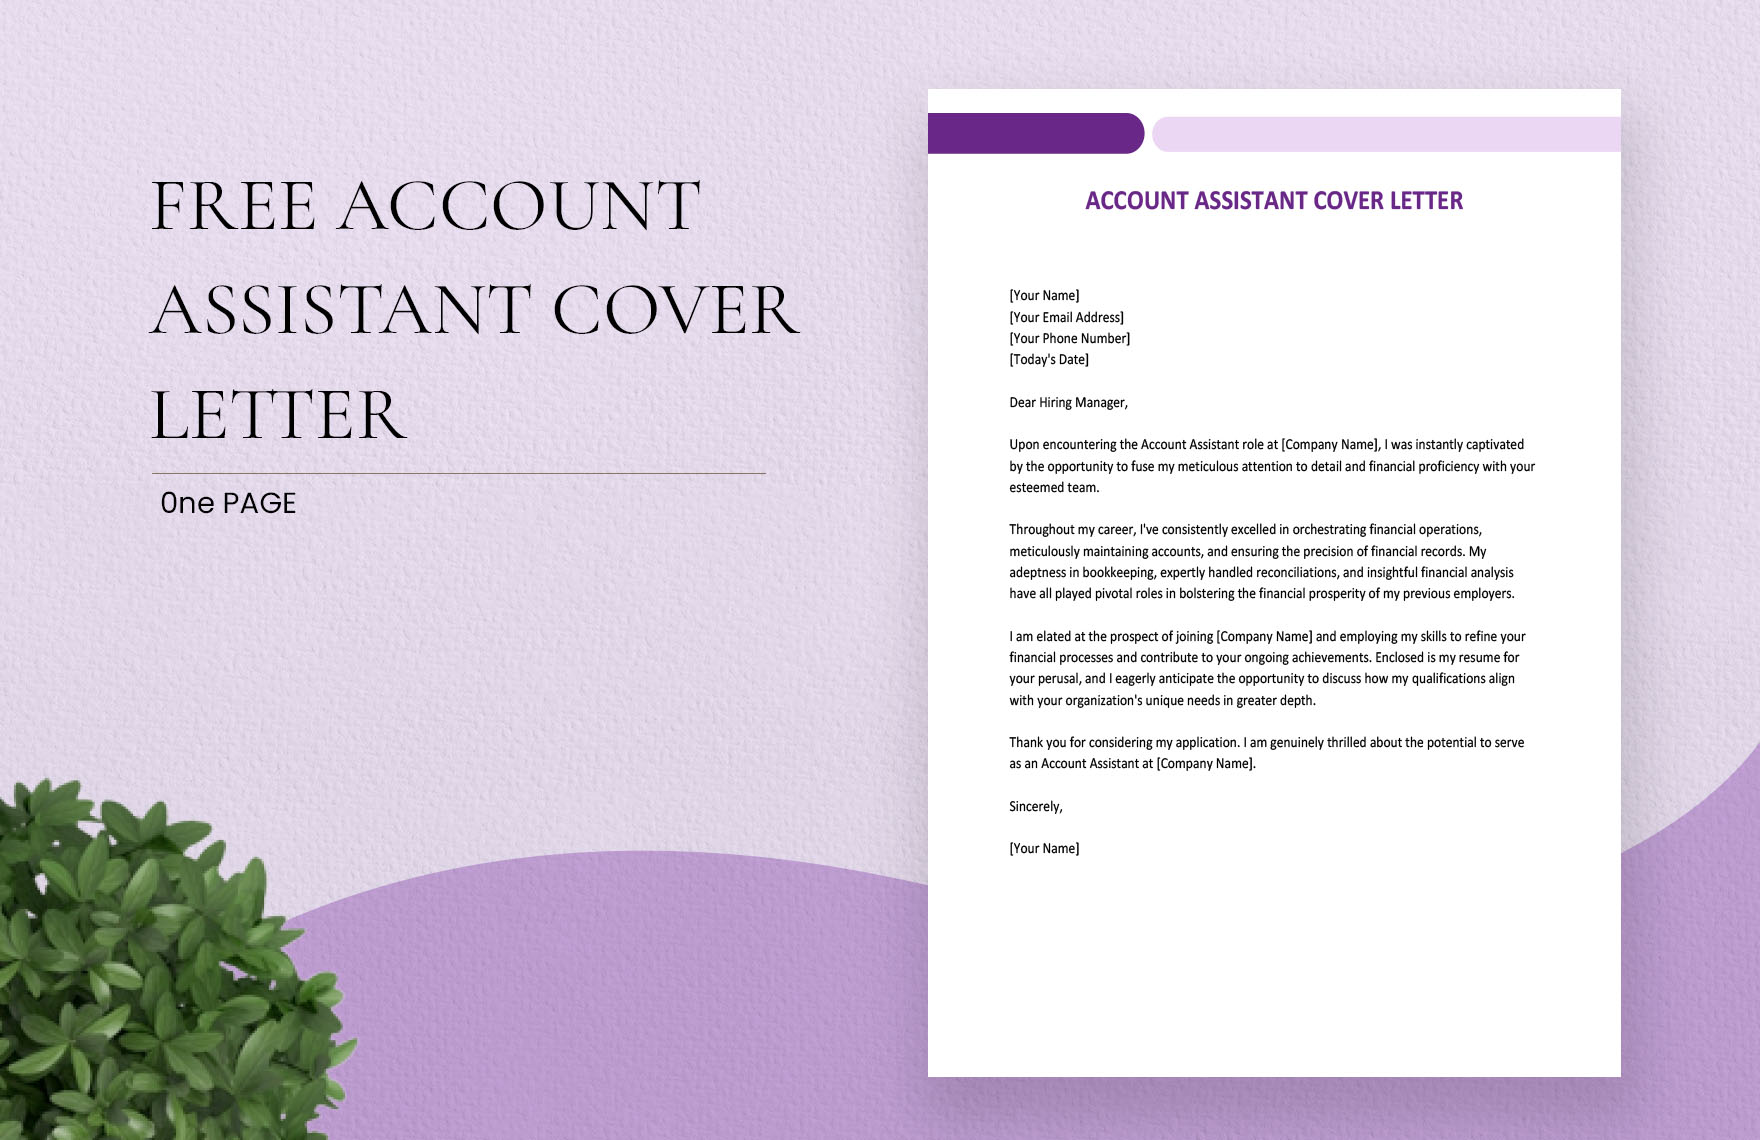 Account Assistant Cover Letter